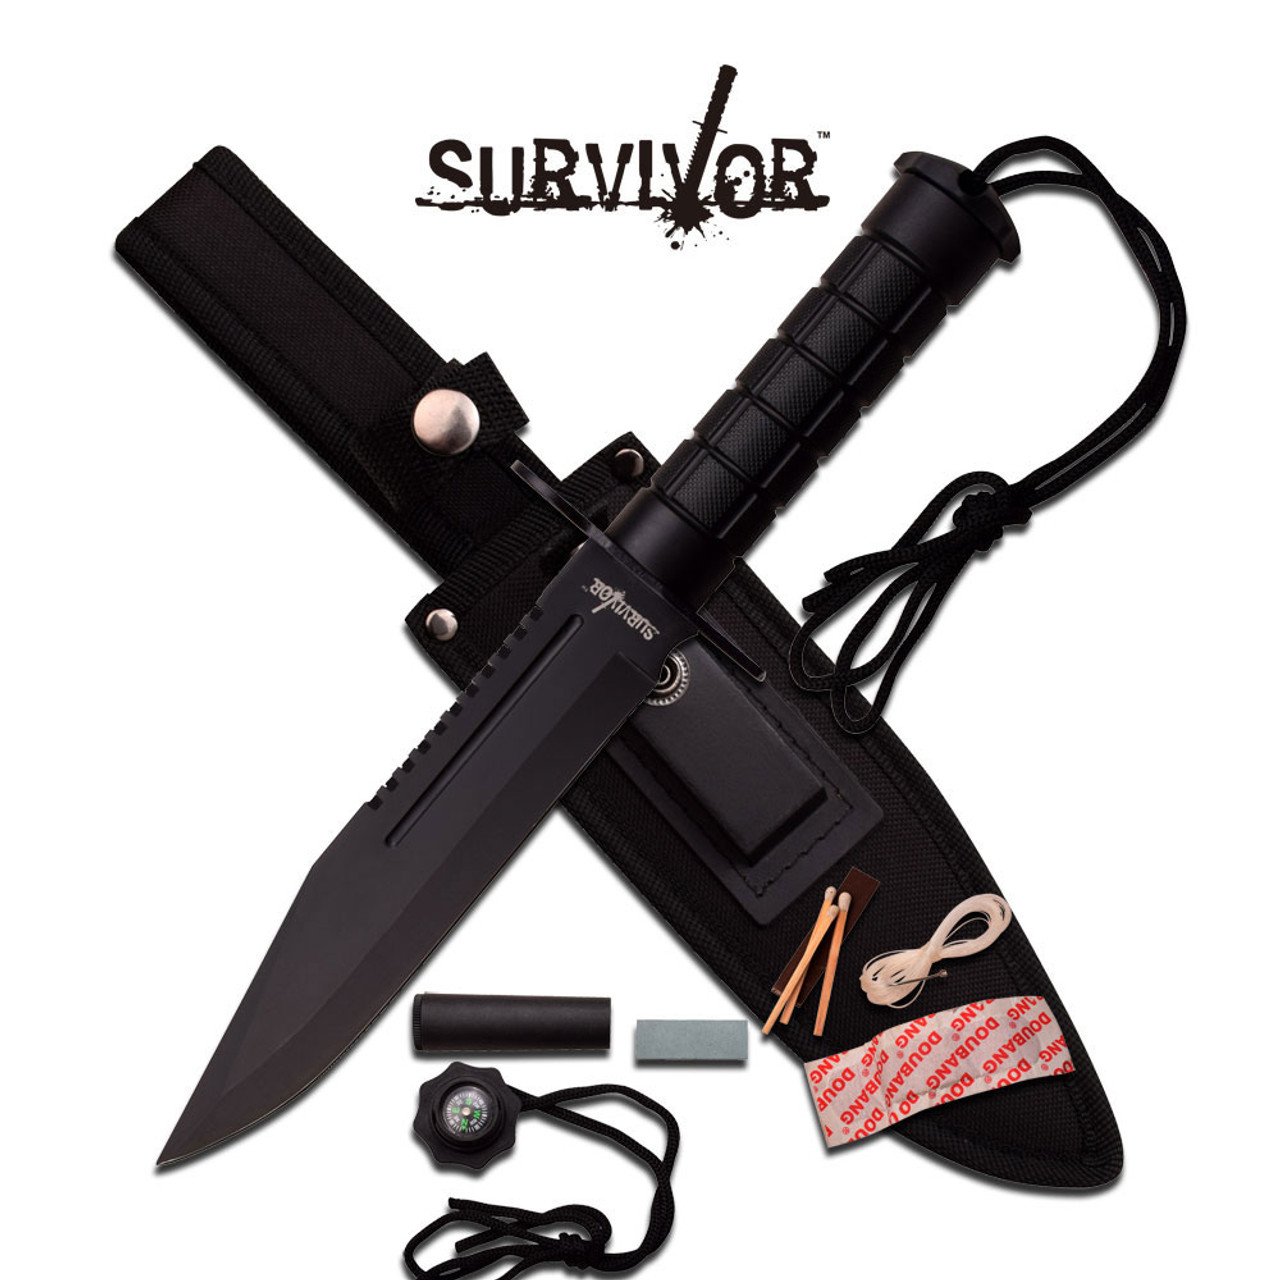 12.25 Tactical Rambo Fighting Survival Knife with Leg Drop